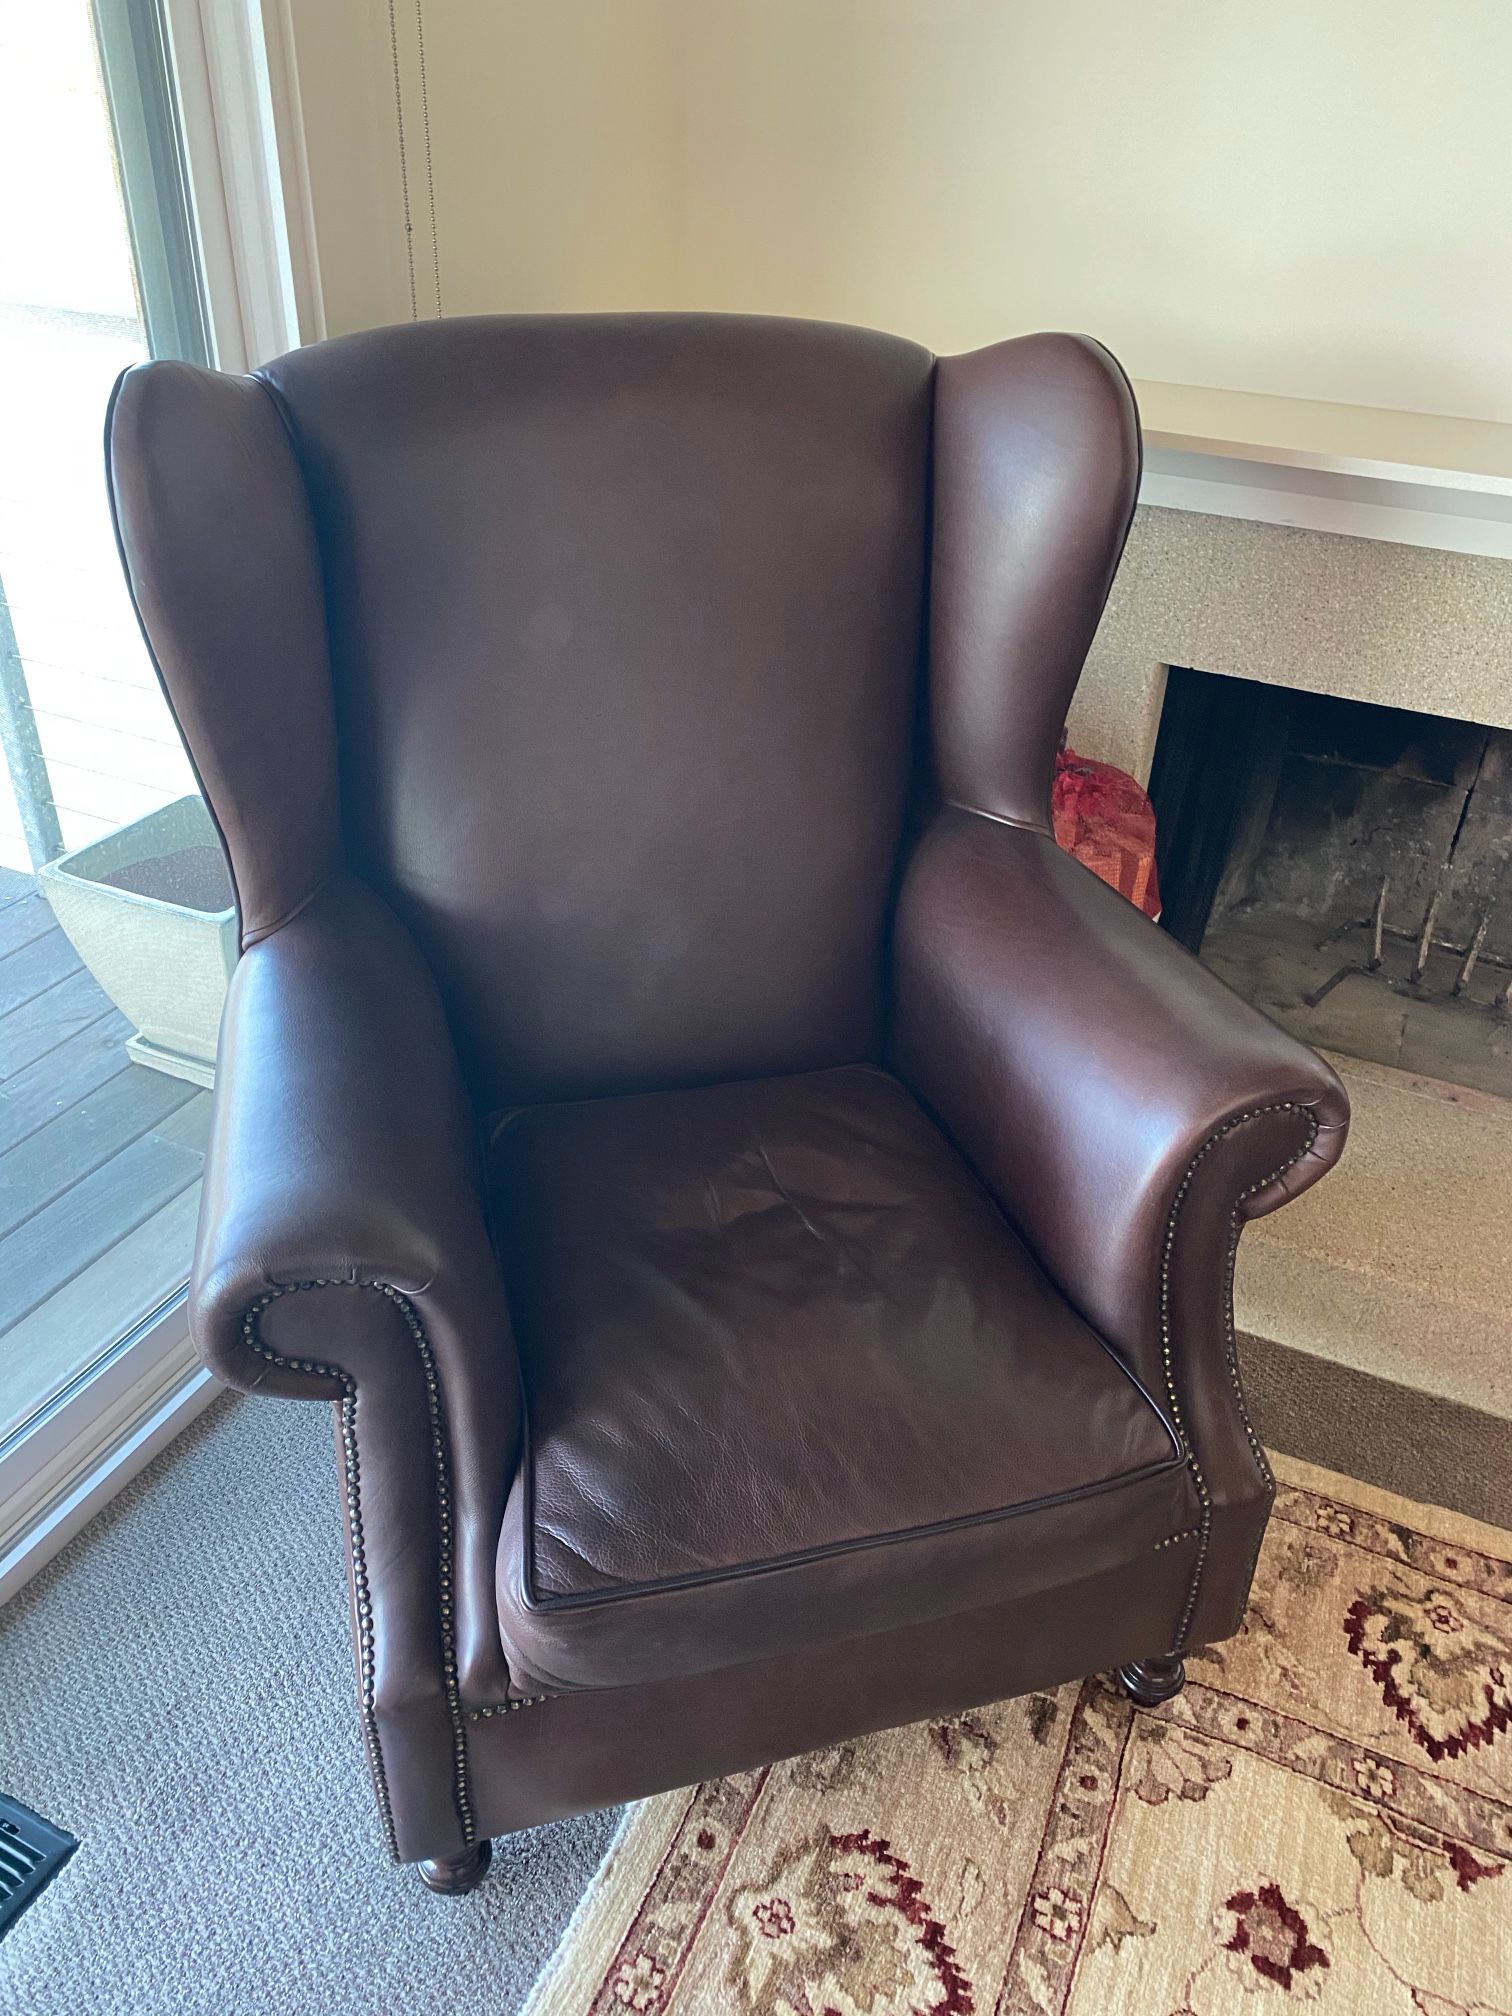 2X Large Leather Wing Back Chairs For Sale, Together Or Separate $300 Each 